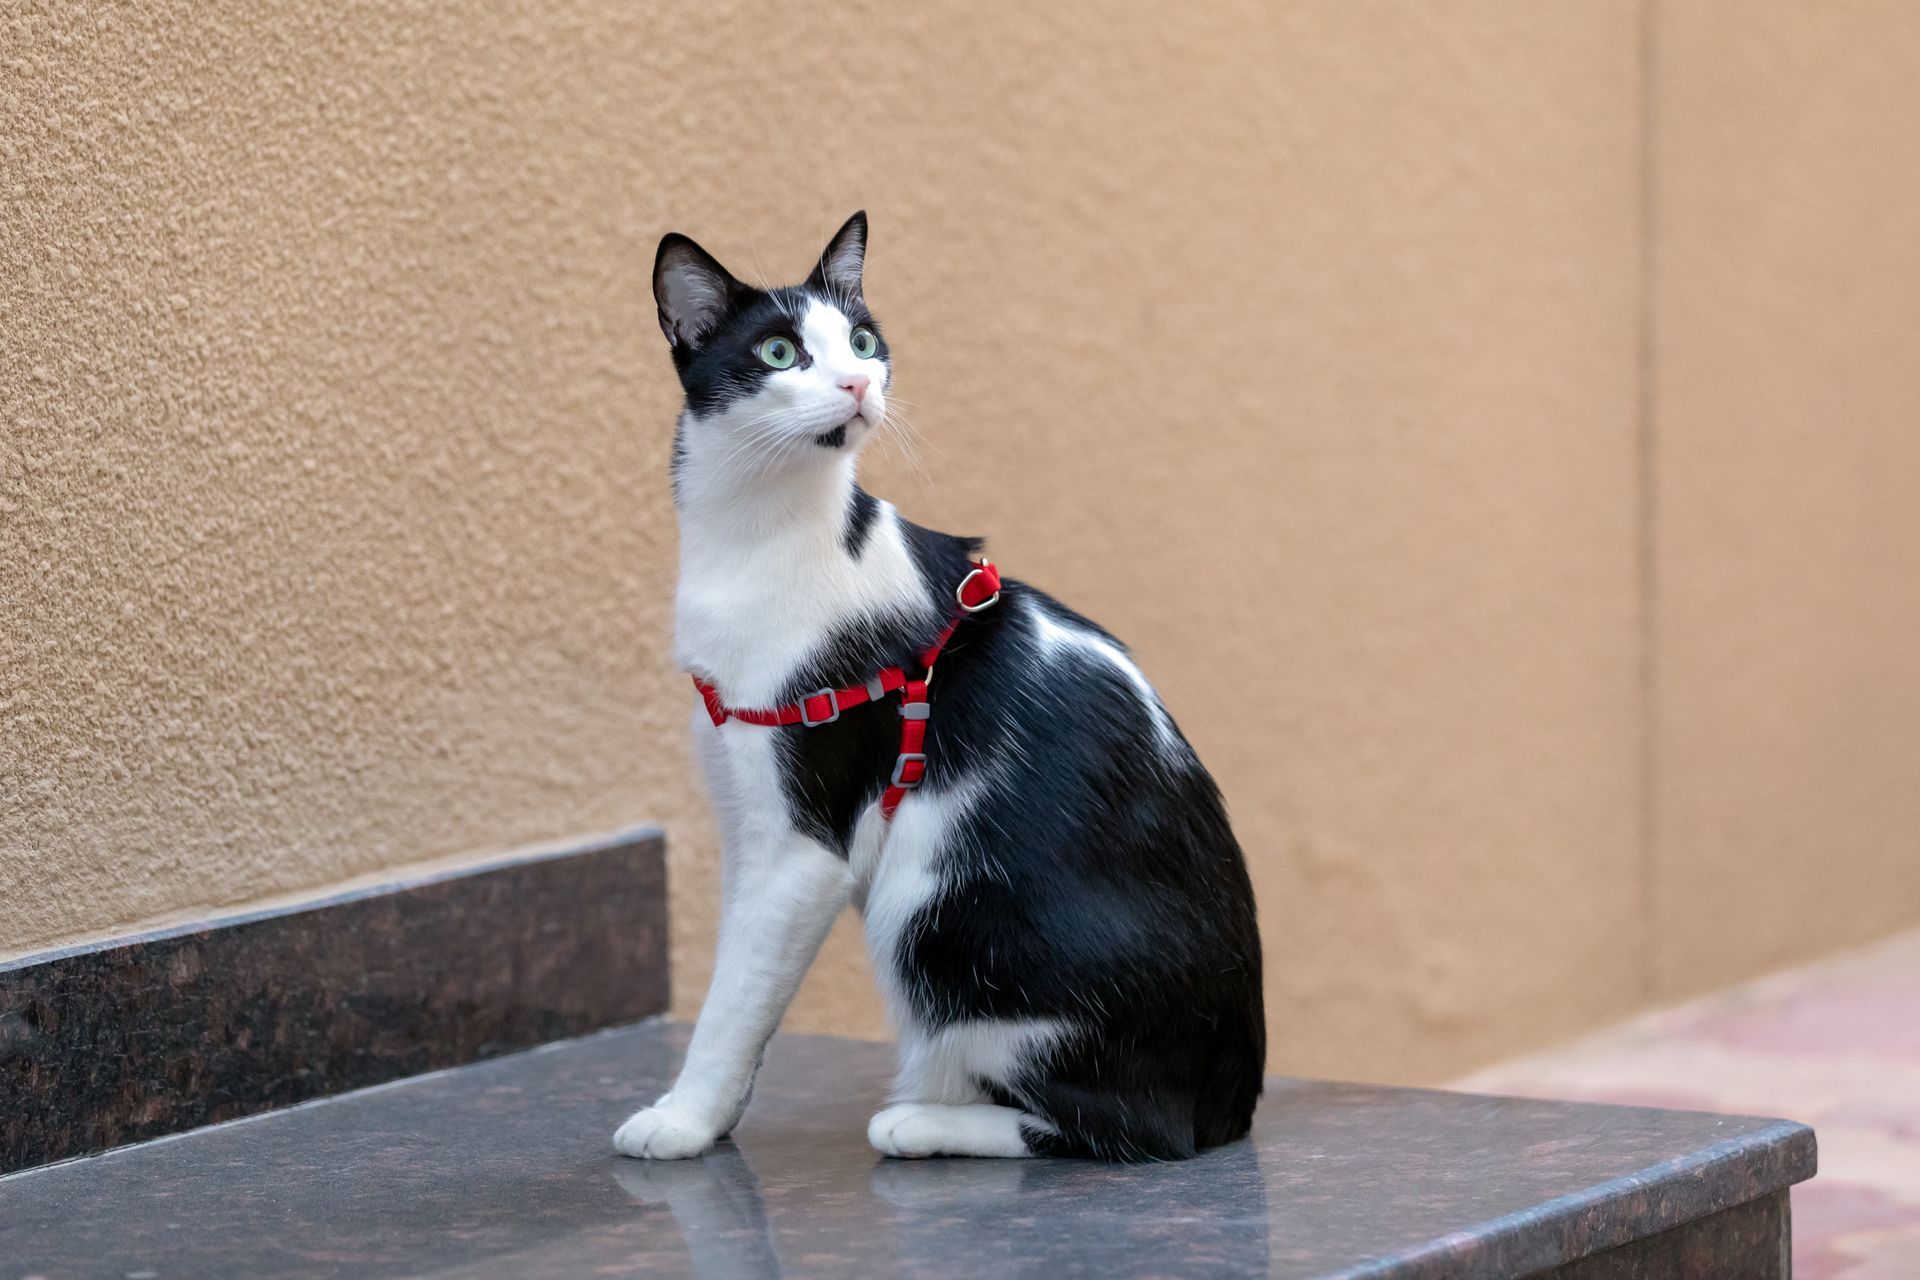 A black and white cat wearing a red harness is sitting on a staircase.